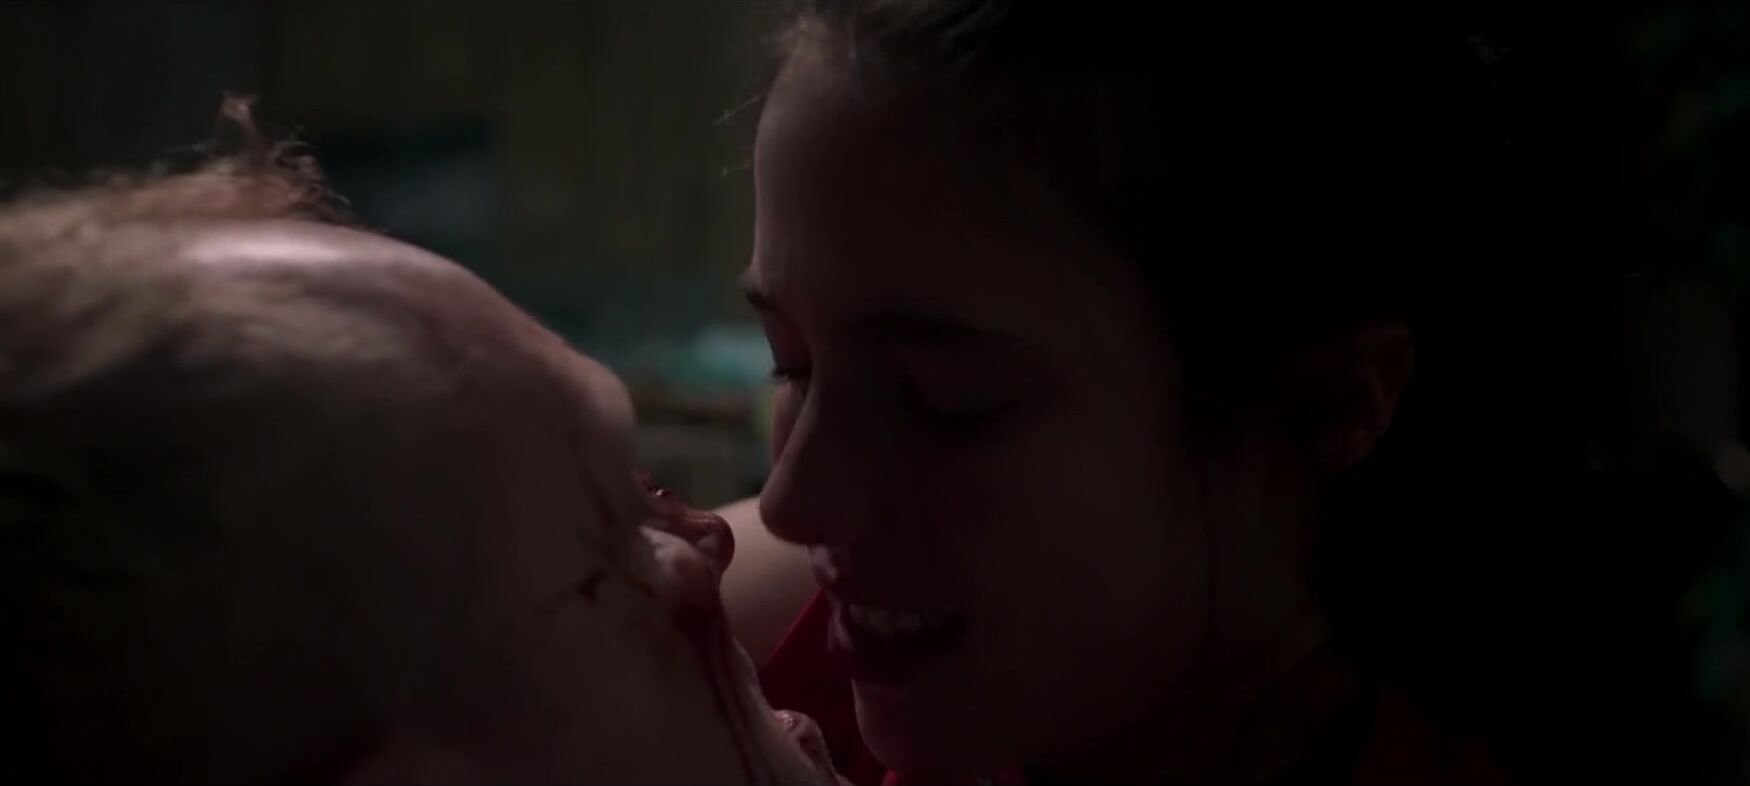 Free Amateur Porn Nude and sex moments of skinny sexual pervert Margaret Qualley from Donnybrook (2018) Internal